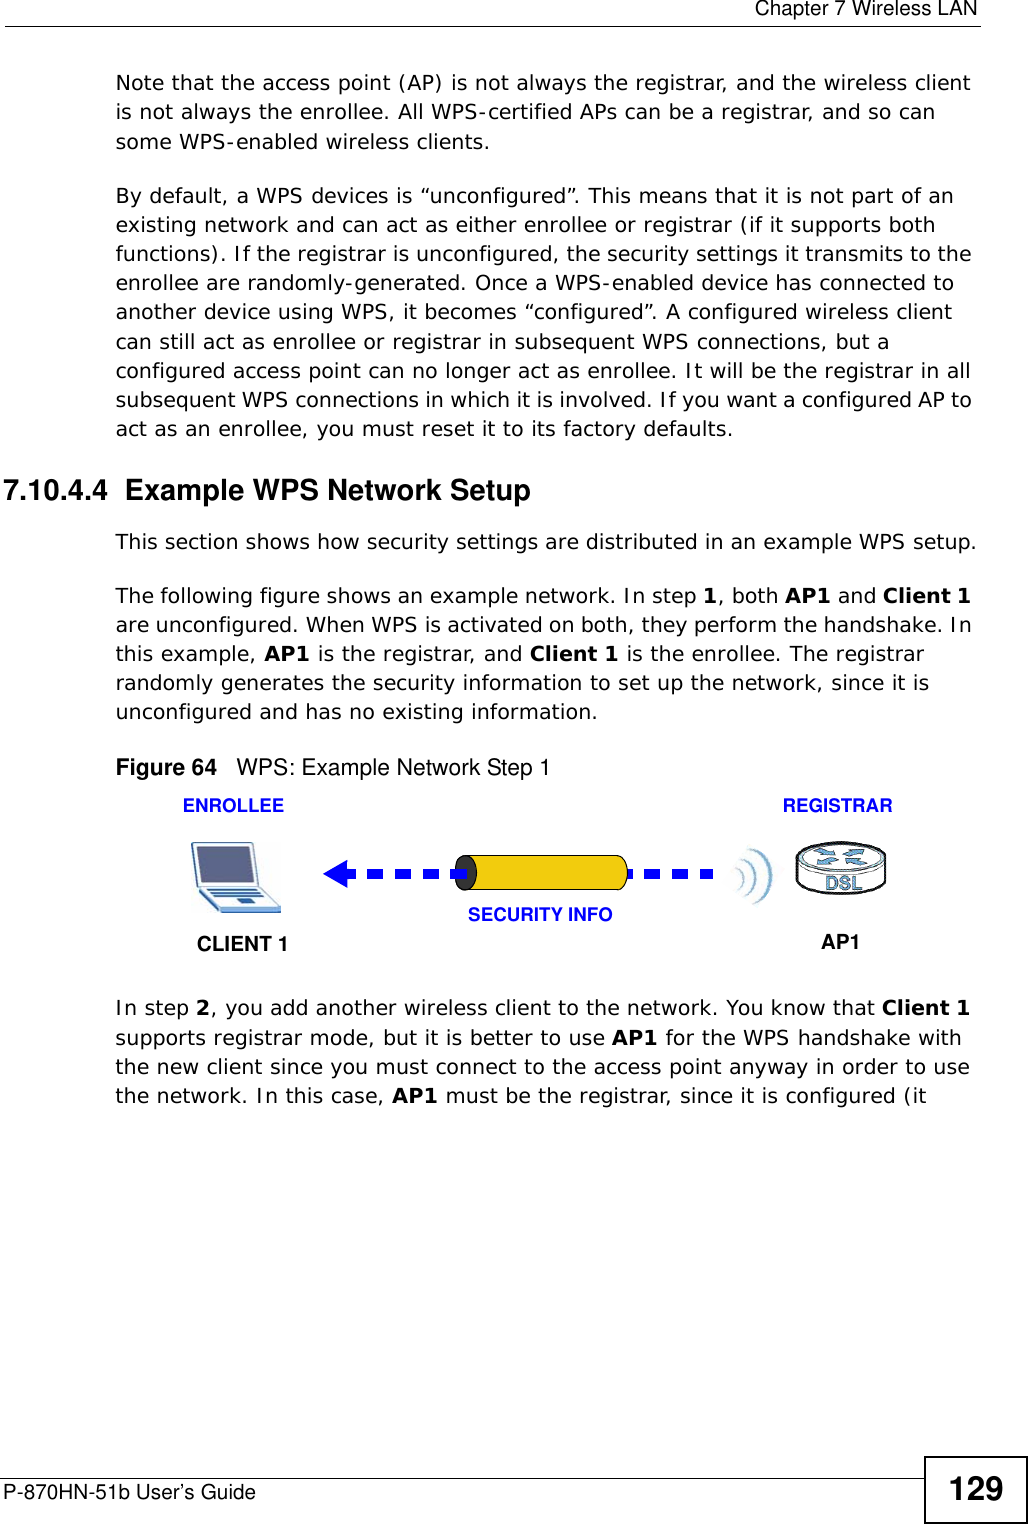  Chapter 7 Wireless LANP-870HN-51b User’s Guide 129Note that the access point (AP) is not always the registrar, and the wireless client is not always the enrollee. All WPS-certified APs can be a registrar, and so can some WPS-enabled wireless clients.By default, a WPS devices is “unconfigured”. This means that it is not part of an existing network and can act as either enrollee or registrar (if it supports both functions). If the registrar is unconfigured, the security settings it transmits to the enrollee are randomly-generated. Once a WPS-enabled device has connected to another device using WPS, it becomes “configured”. A configured wireless client can still act as enrollee or registrar in subsequent WPS connections, but a configured access point can no longer act as enrollee. It will be the registrar in all subsequent WPS connections in which it is involved. If you want a configured AP to act as an enrollee, you must reset it to its factory defaults.7.10.4.4  Example WPS Network SetupThis section shows how security settings are distributed in an example WPS setup.The following figure shows an example network. In step 1, both AP1 and Client 1 are unconfigured. When WPS is activated on both, they perform the handshake. In this example, AP1 is the registrar, and Client 1 is the enrollee. The registrar randomly generates the security information to set up the network, since it is unconfigured and has no existing information.Figure 64   WPS: Example Network Step 1In step 2, you add another wireless client to the network. You know that Client 1 supports registrar mode, but it is better to use AP1 for the WPS handshake with the new client since you must connect to the access point anyway in order to use the network. In this case, AP1 must be the registrar, since it is configured (it REGISTRARENROLLEESECURITY INFOCLIENT 1 AP1